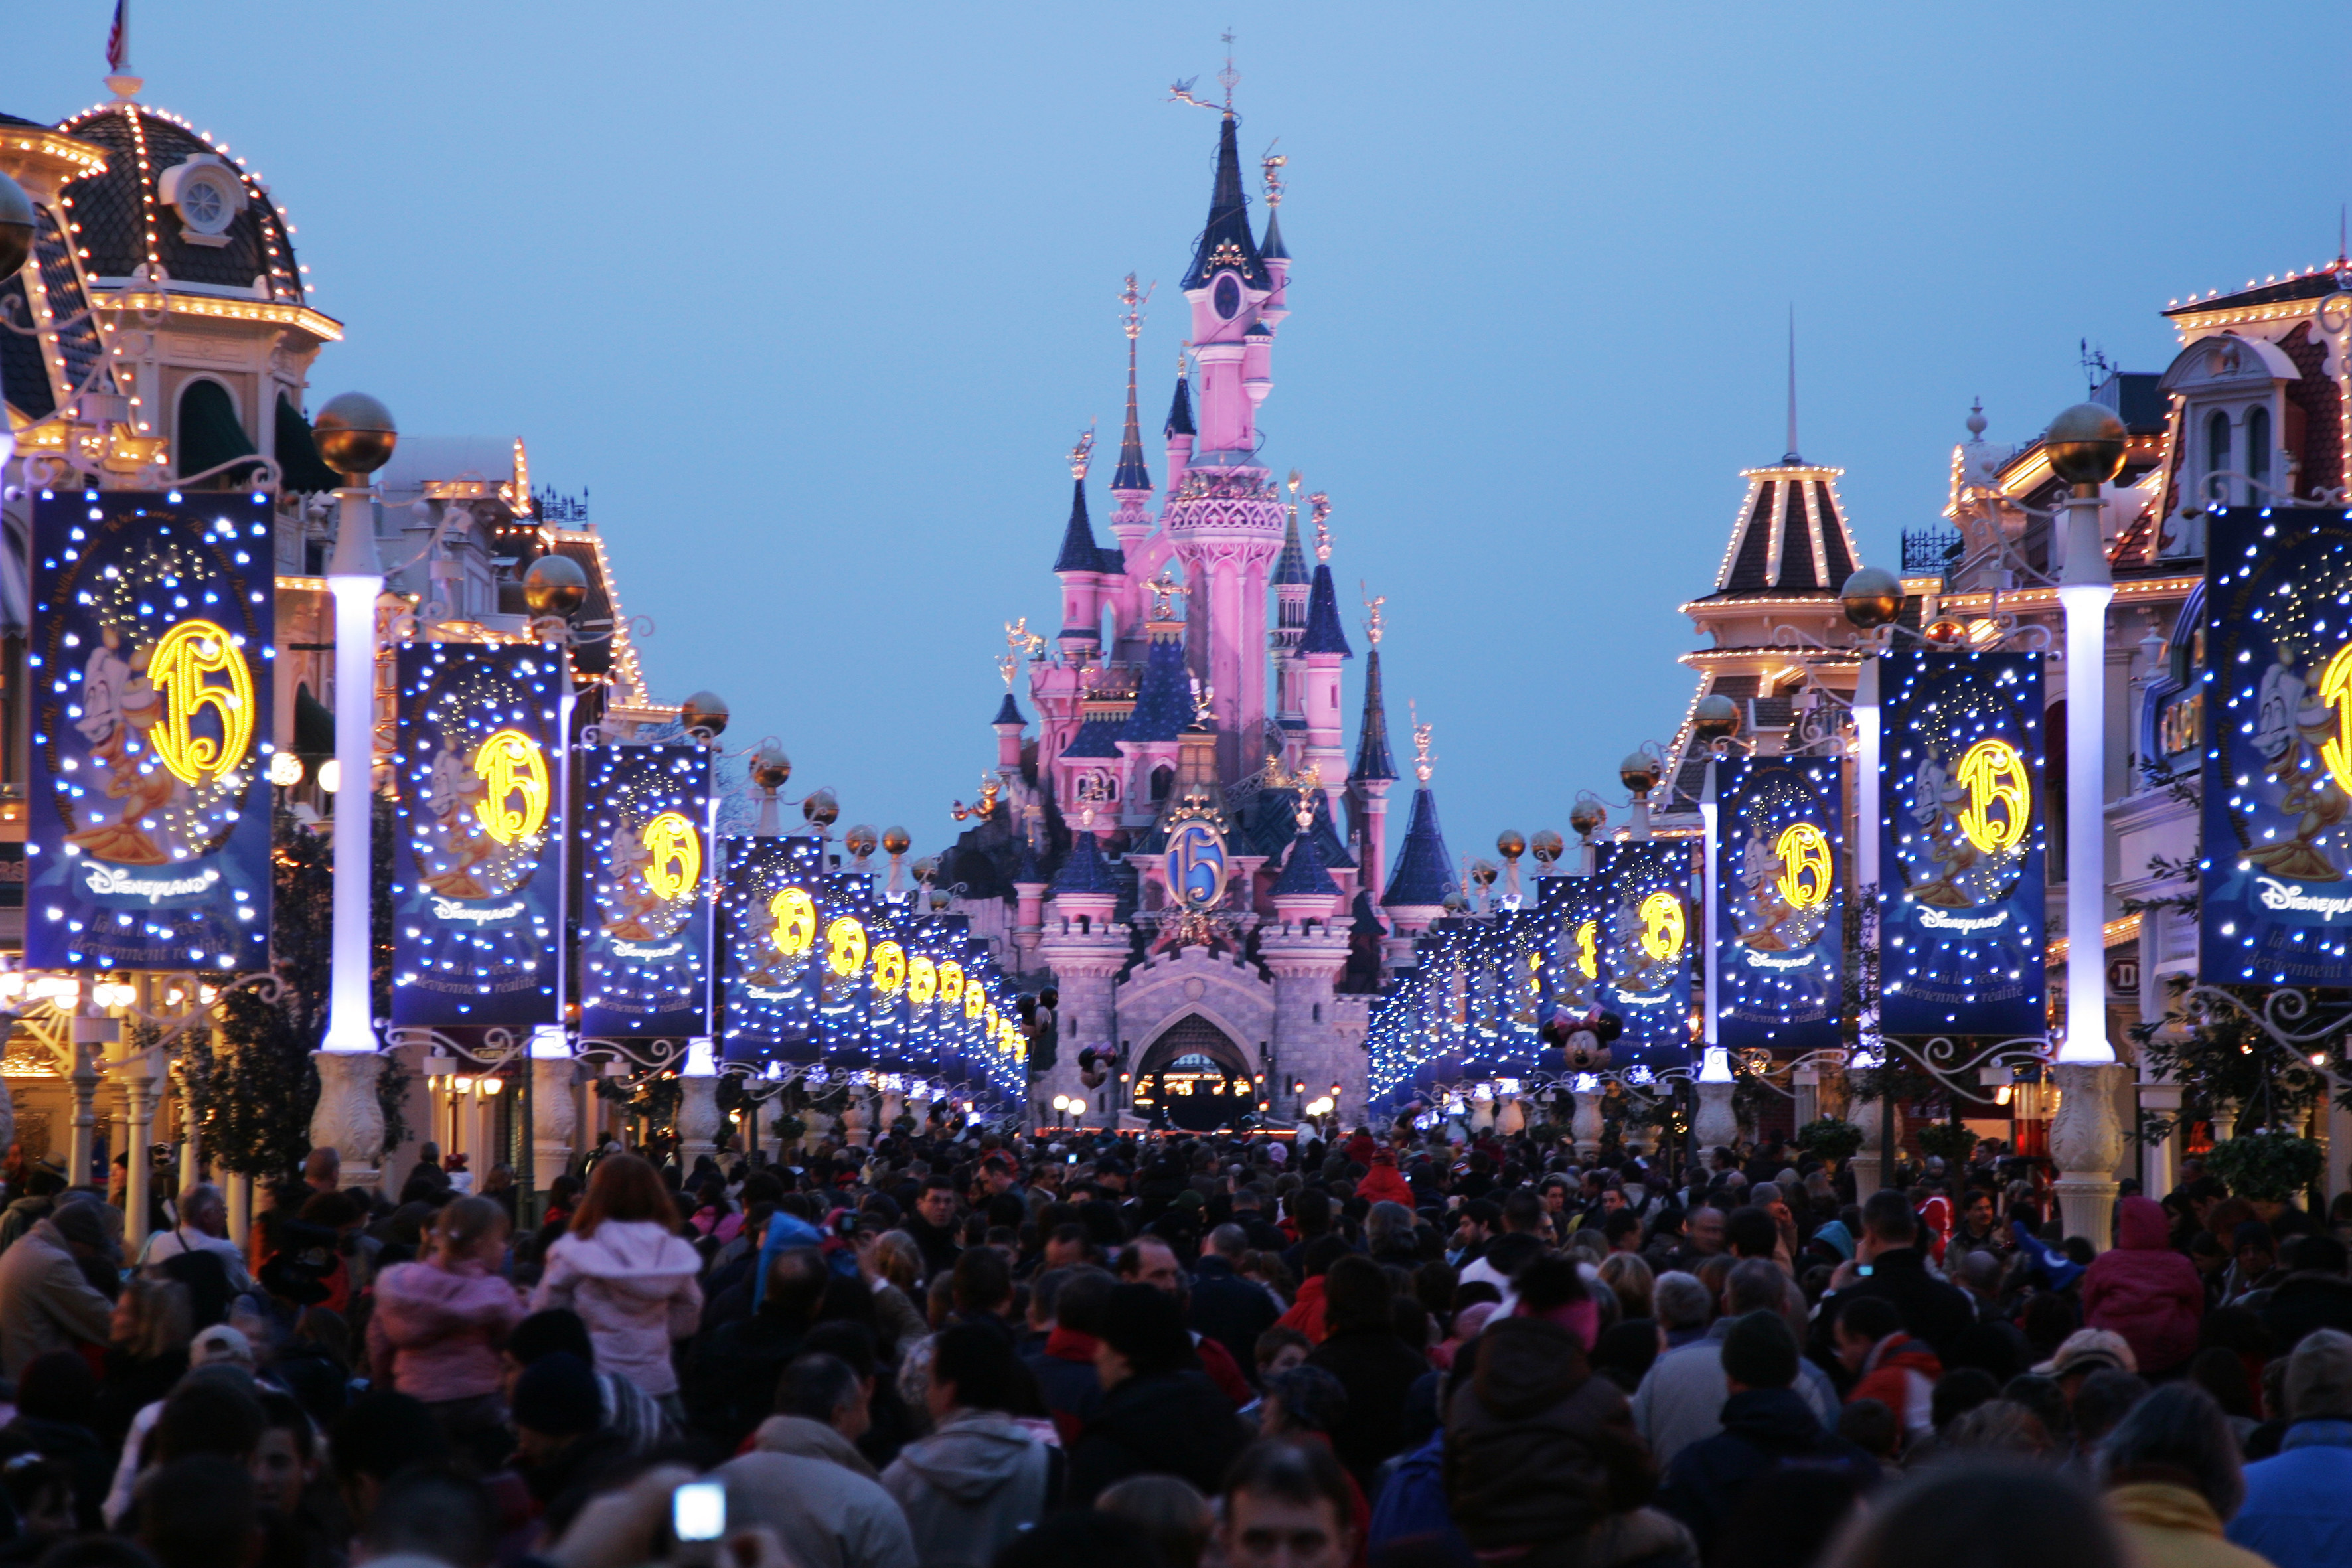 Sleeping Beauty Castle during Disneyland Paris - 15th Anniversary Celebration at Disneyland Paris in Marne-La-Vallee / Paris, France. (Tony Barson Archive—WireImage/Getty Images)